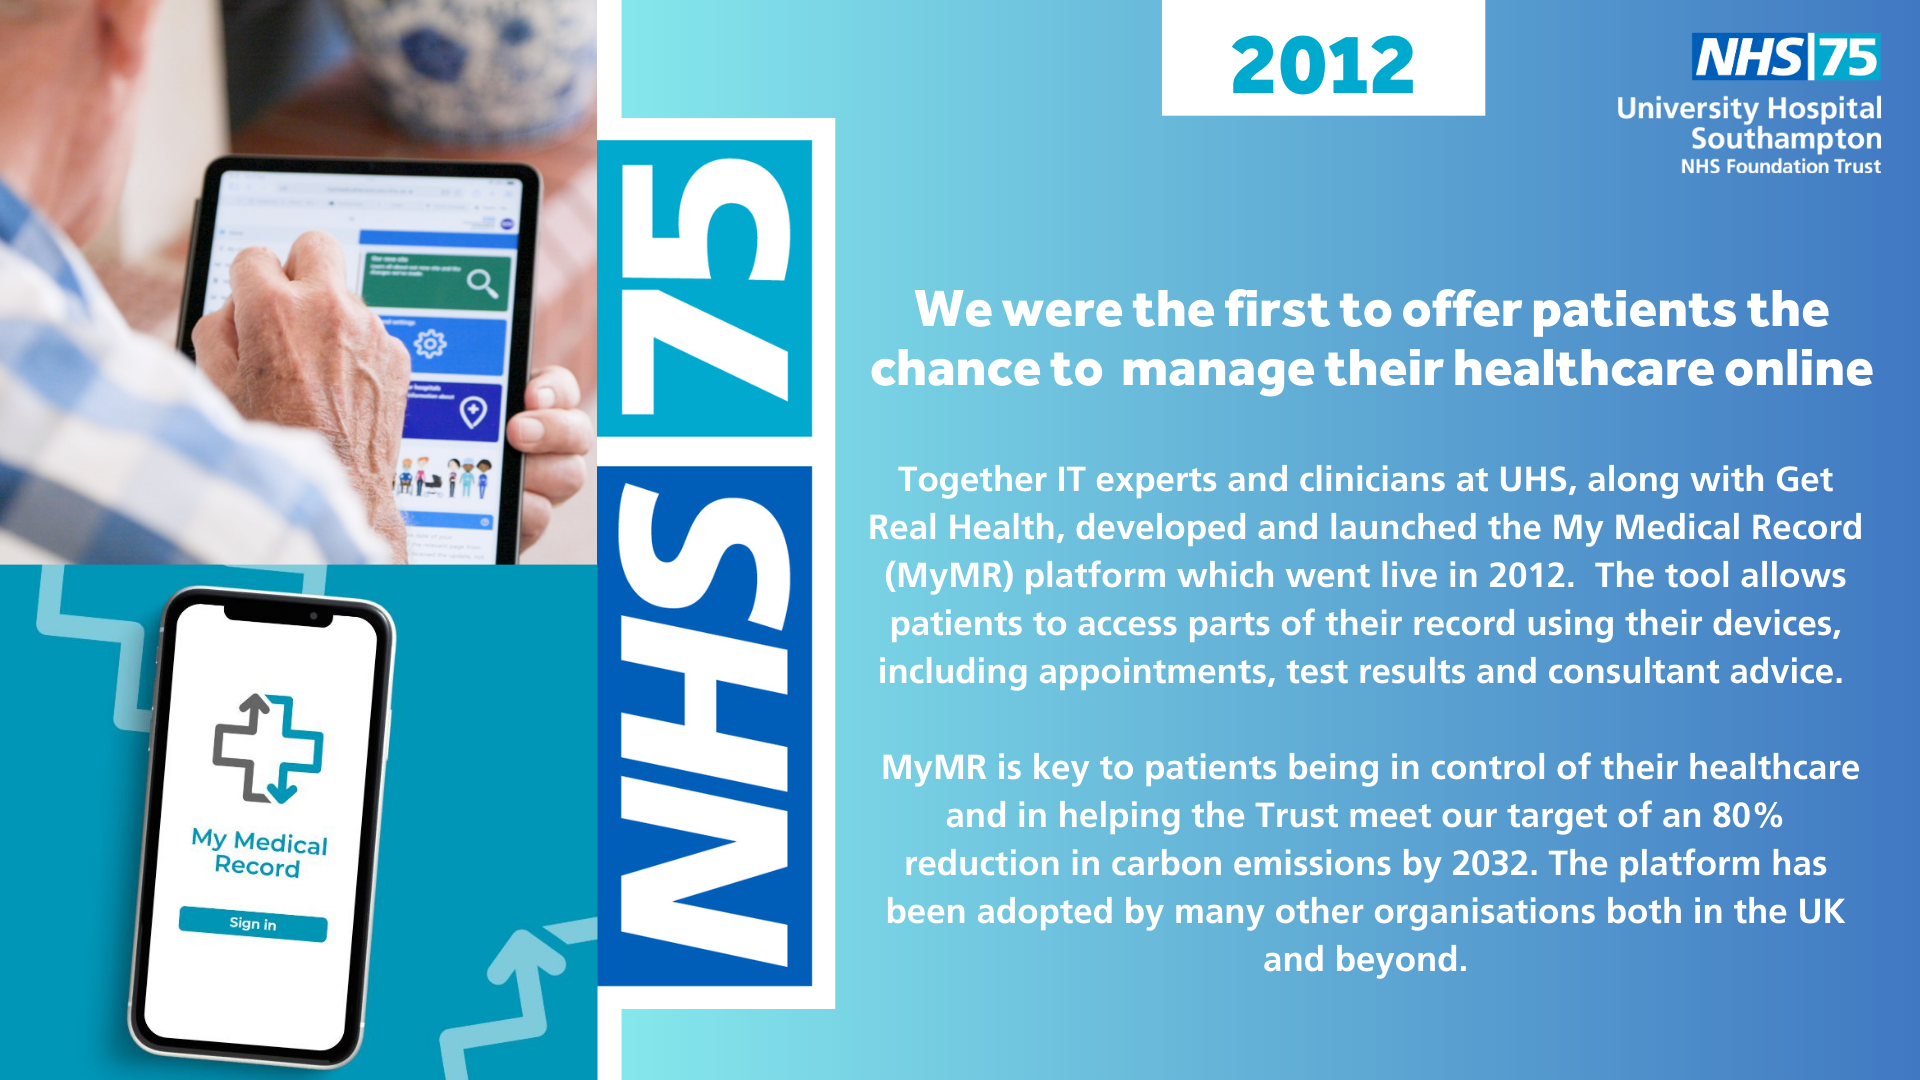 We were the first to offer patients a chance to manage their healthcare online